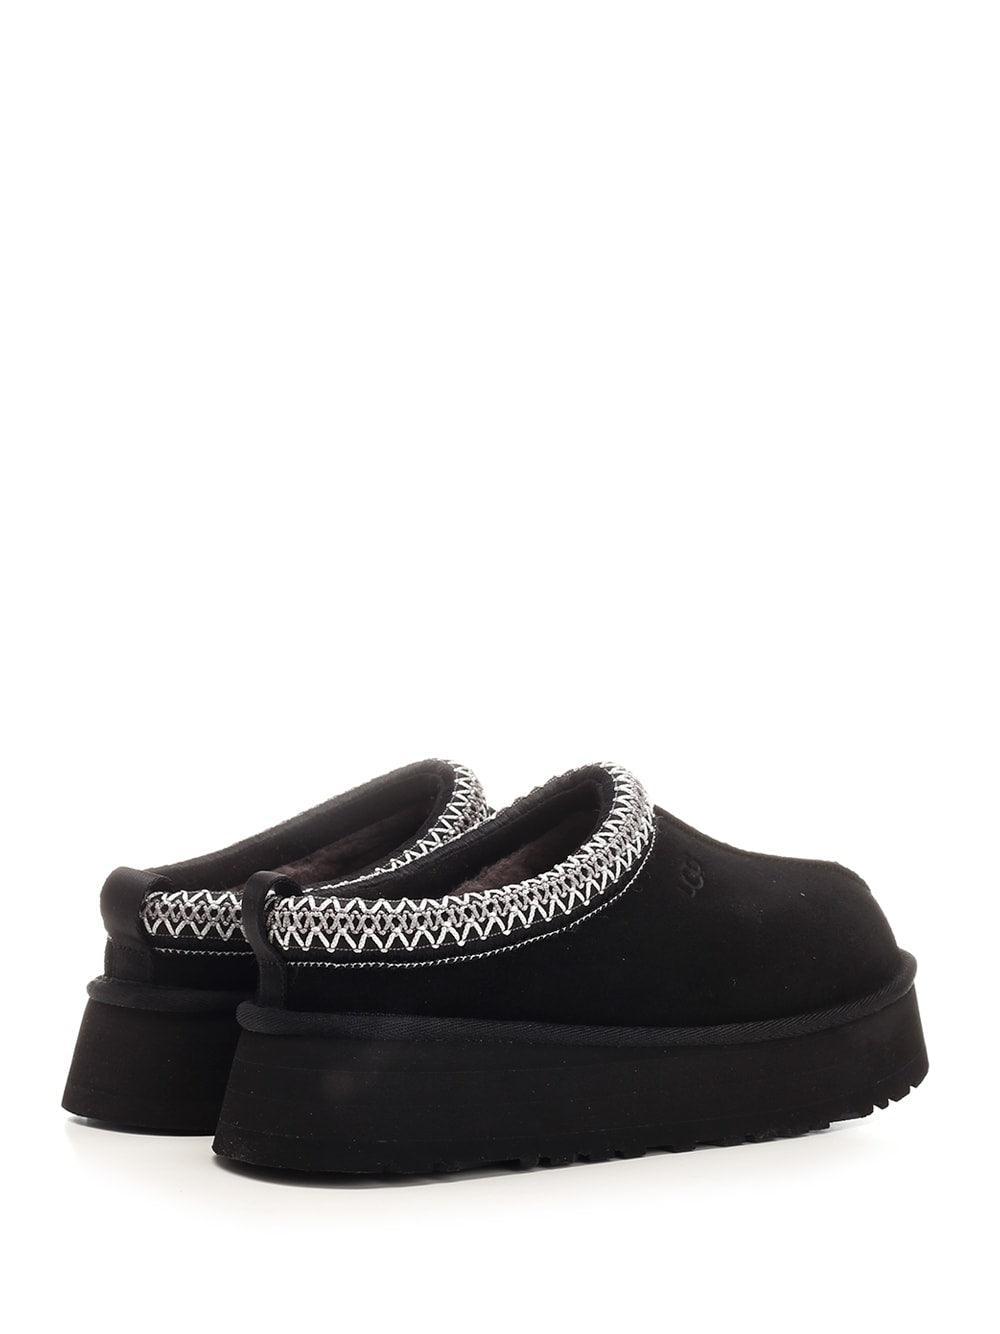 UGG Tazz Slip On Shoes in Black | Lyst